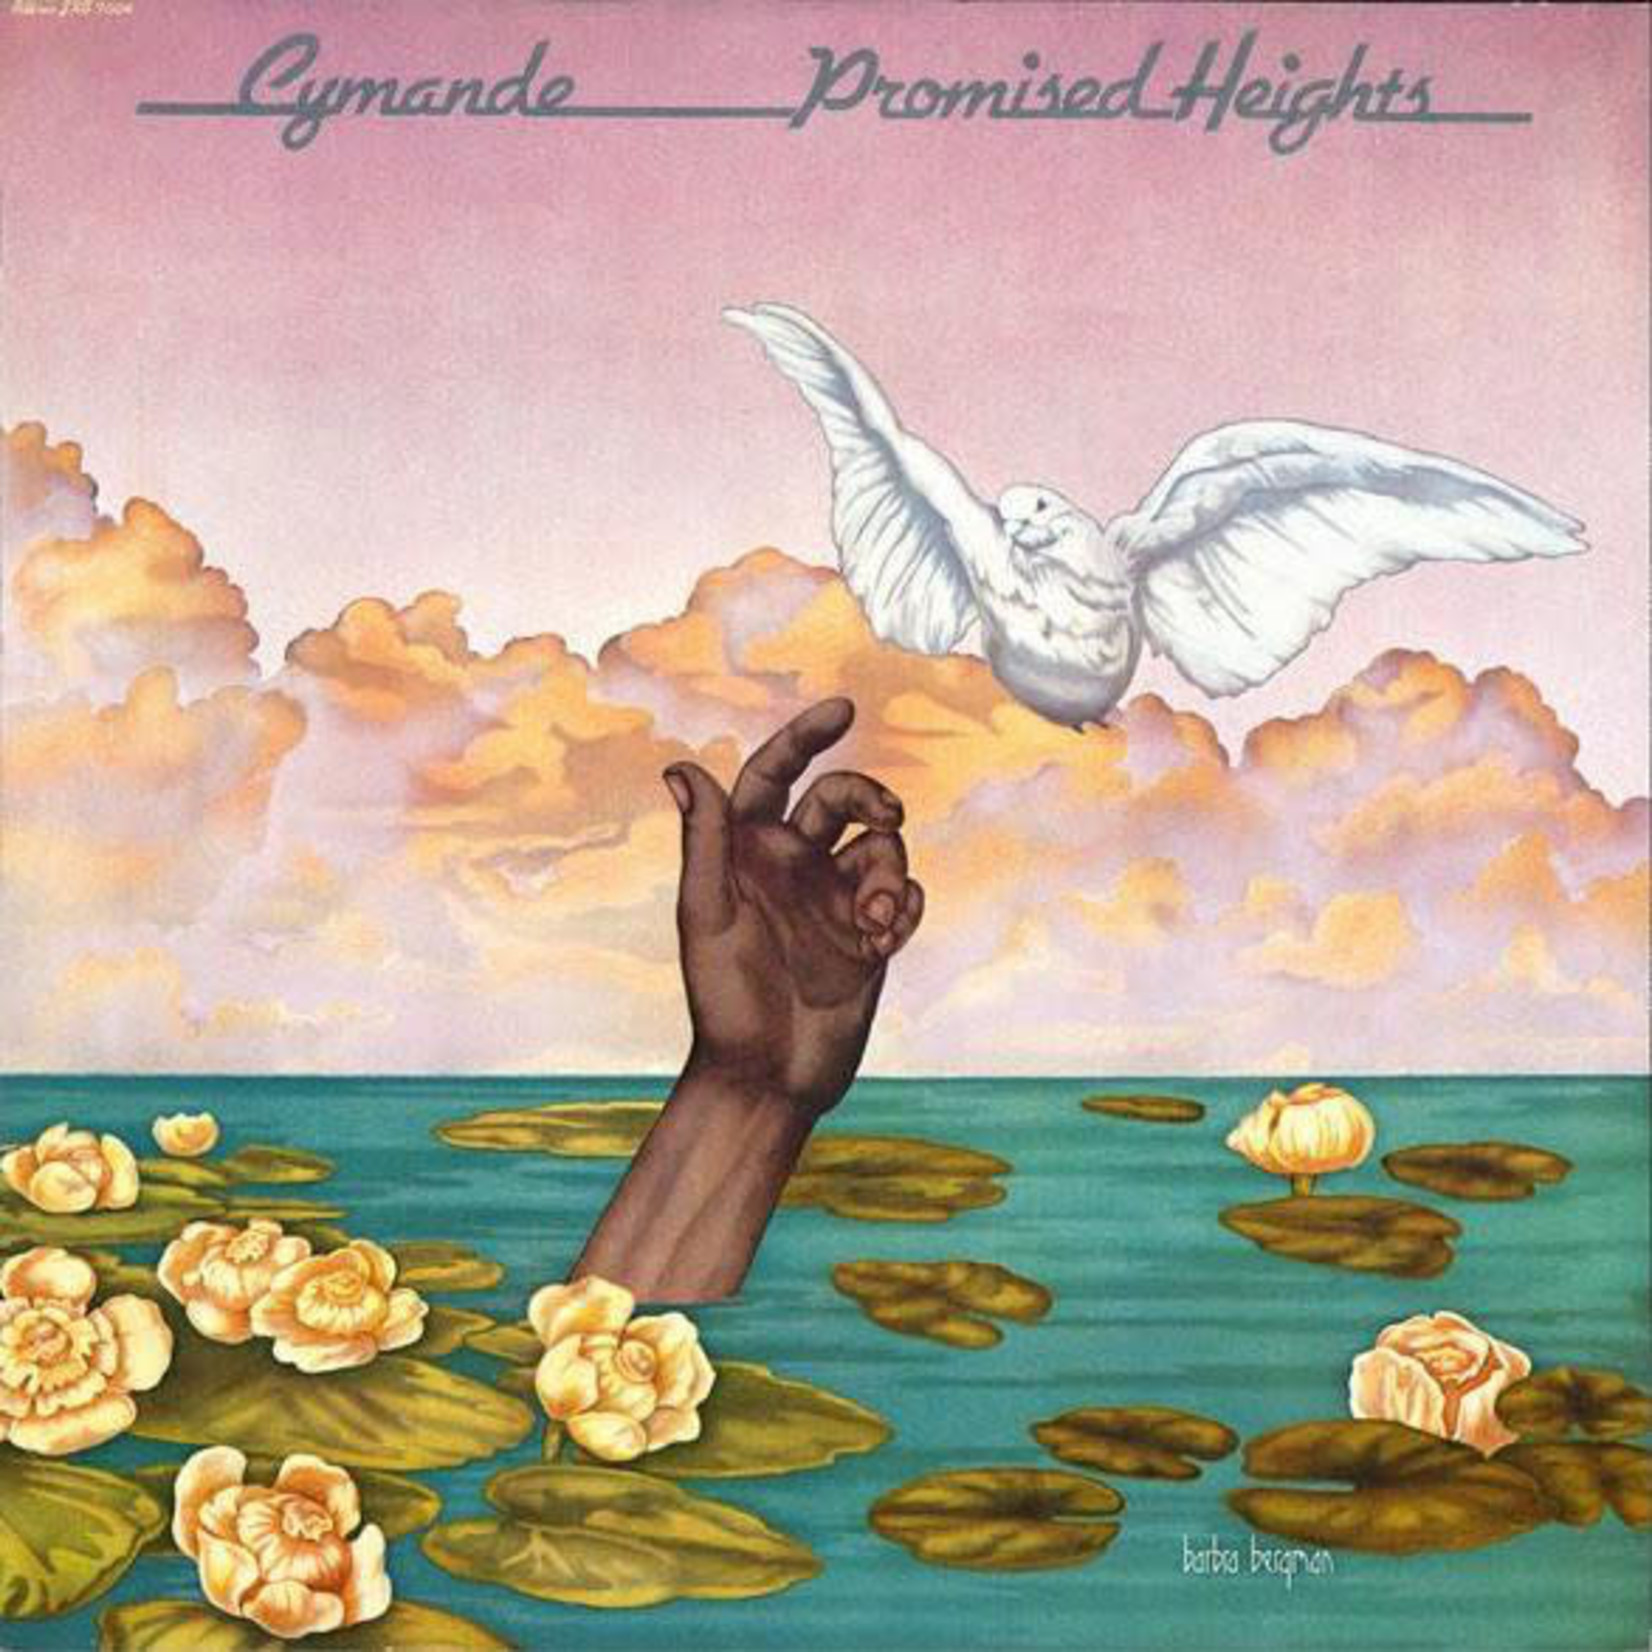 [New] Cymande - Promised Heights